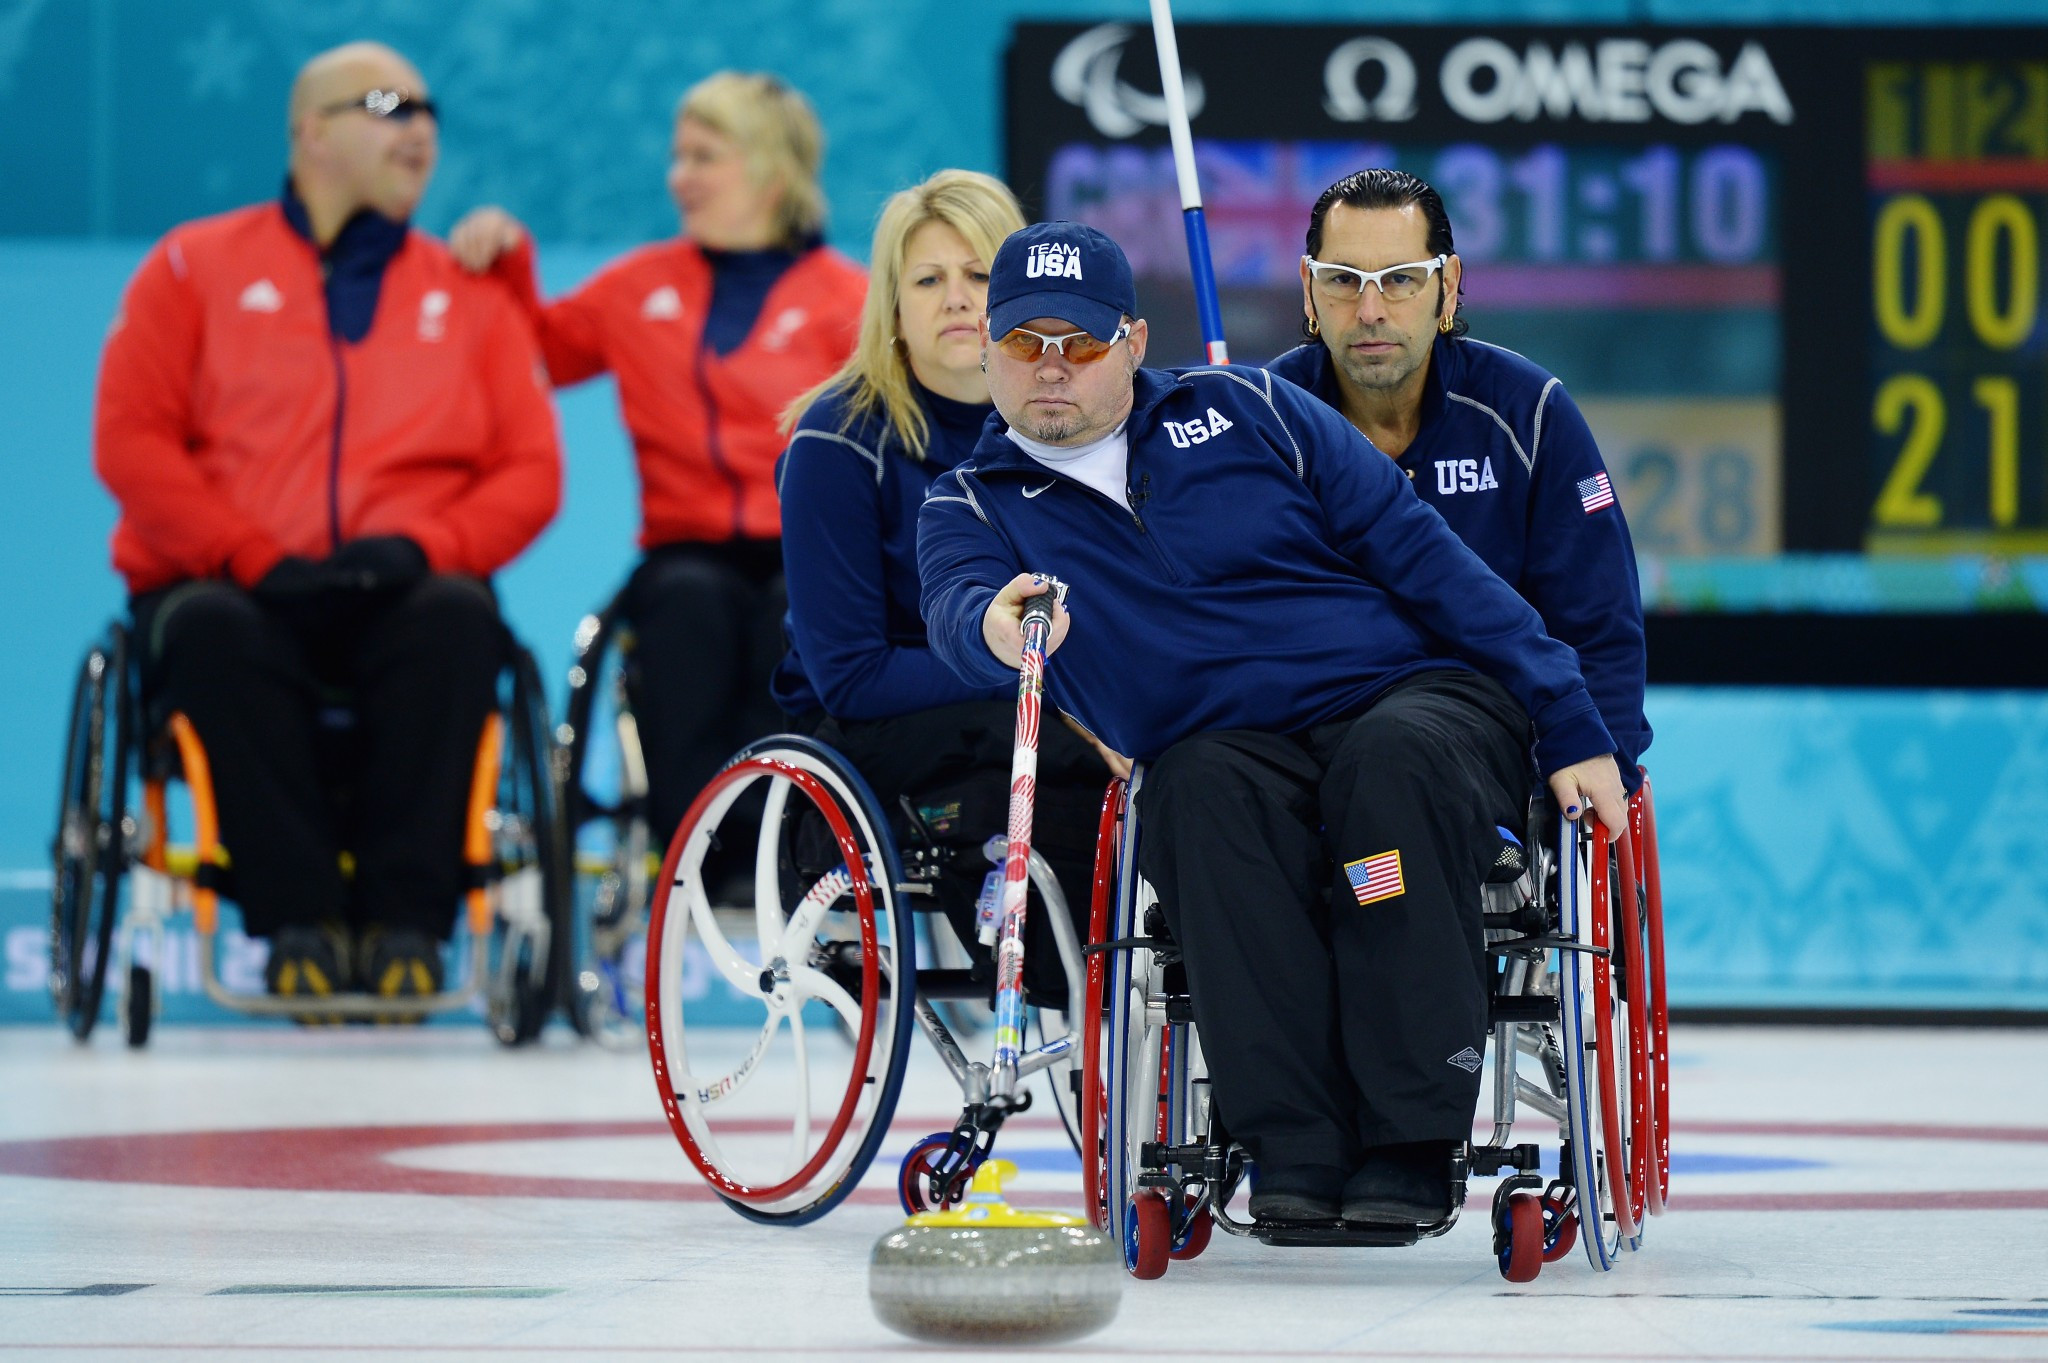 The number of teams at the World Wheelchair Curling Championship will now mirror the Paralympic Games ©Getty Images